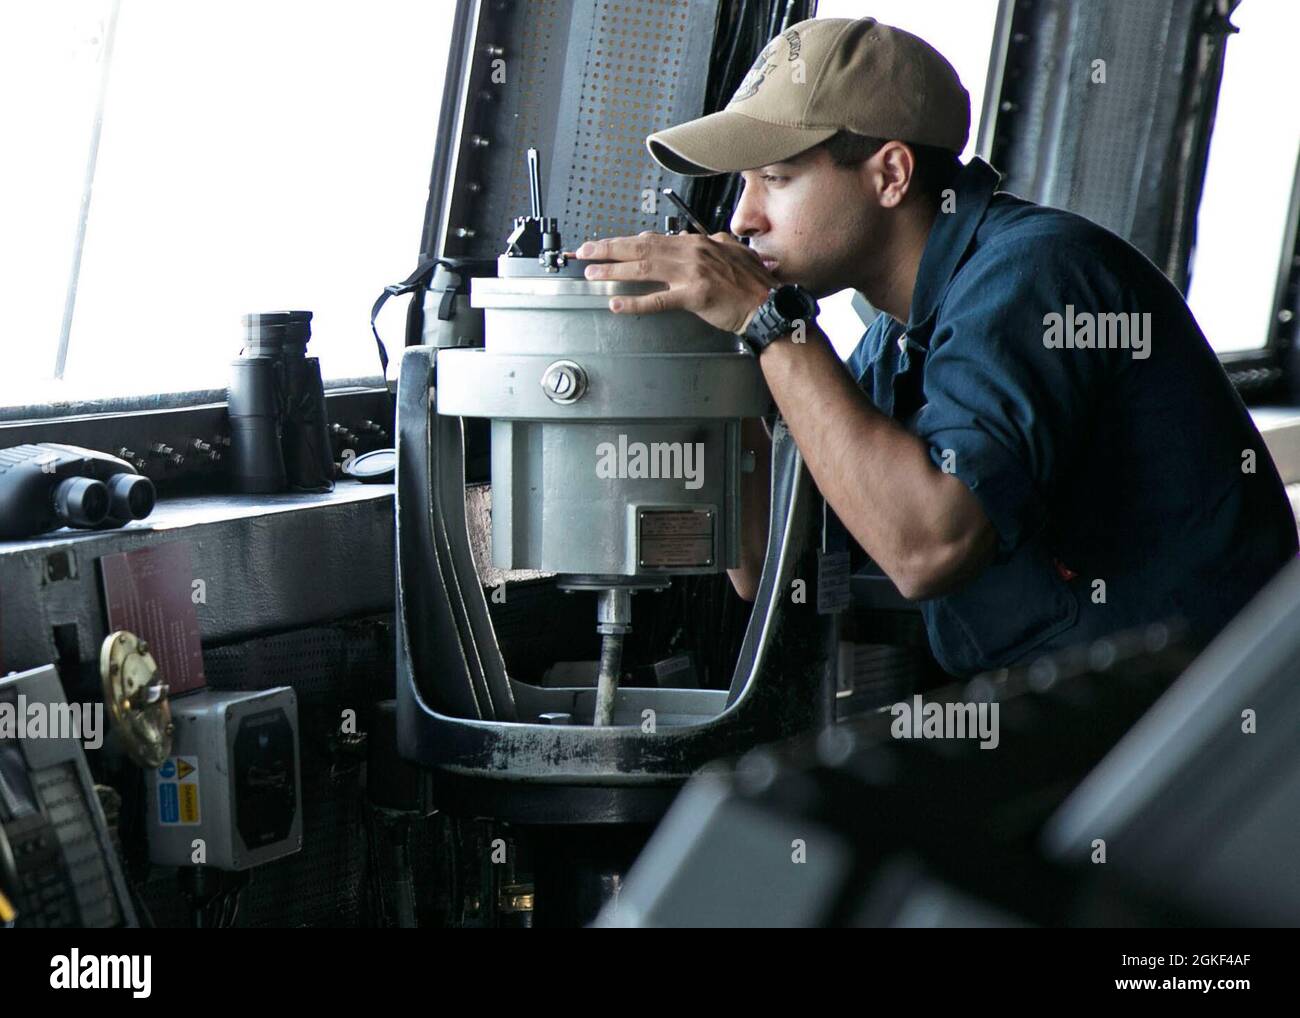 210405-N-OI940-1010  ATLANTIC OCEAN (April 5, 2021)  Ensign Jason Taylor, assigned to the amphibious transport dock ship USS San Antonio (LPD 17), gathers the bearings of a surface contact using a telescopic alidade on the ship's bridge, April 5, 2021. San Antonio is operating in the Atlantic Ocean with Amphibious Squadron 4 and the 24th Marine Expeditionary Unit (24th MEU) as part of the Iwo Jima Amphibious Ready Group. Stock Photo